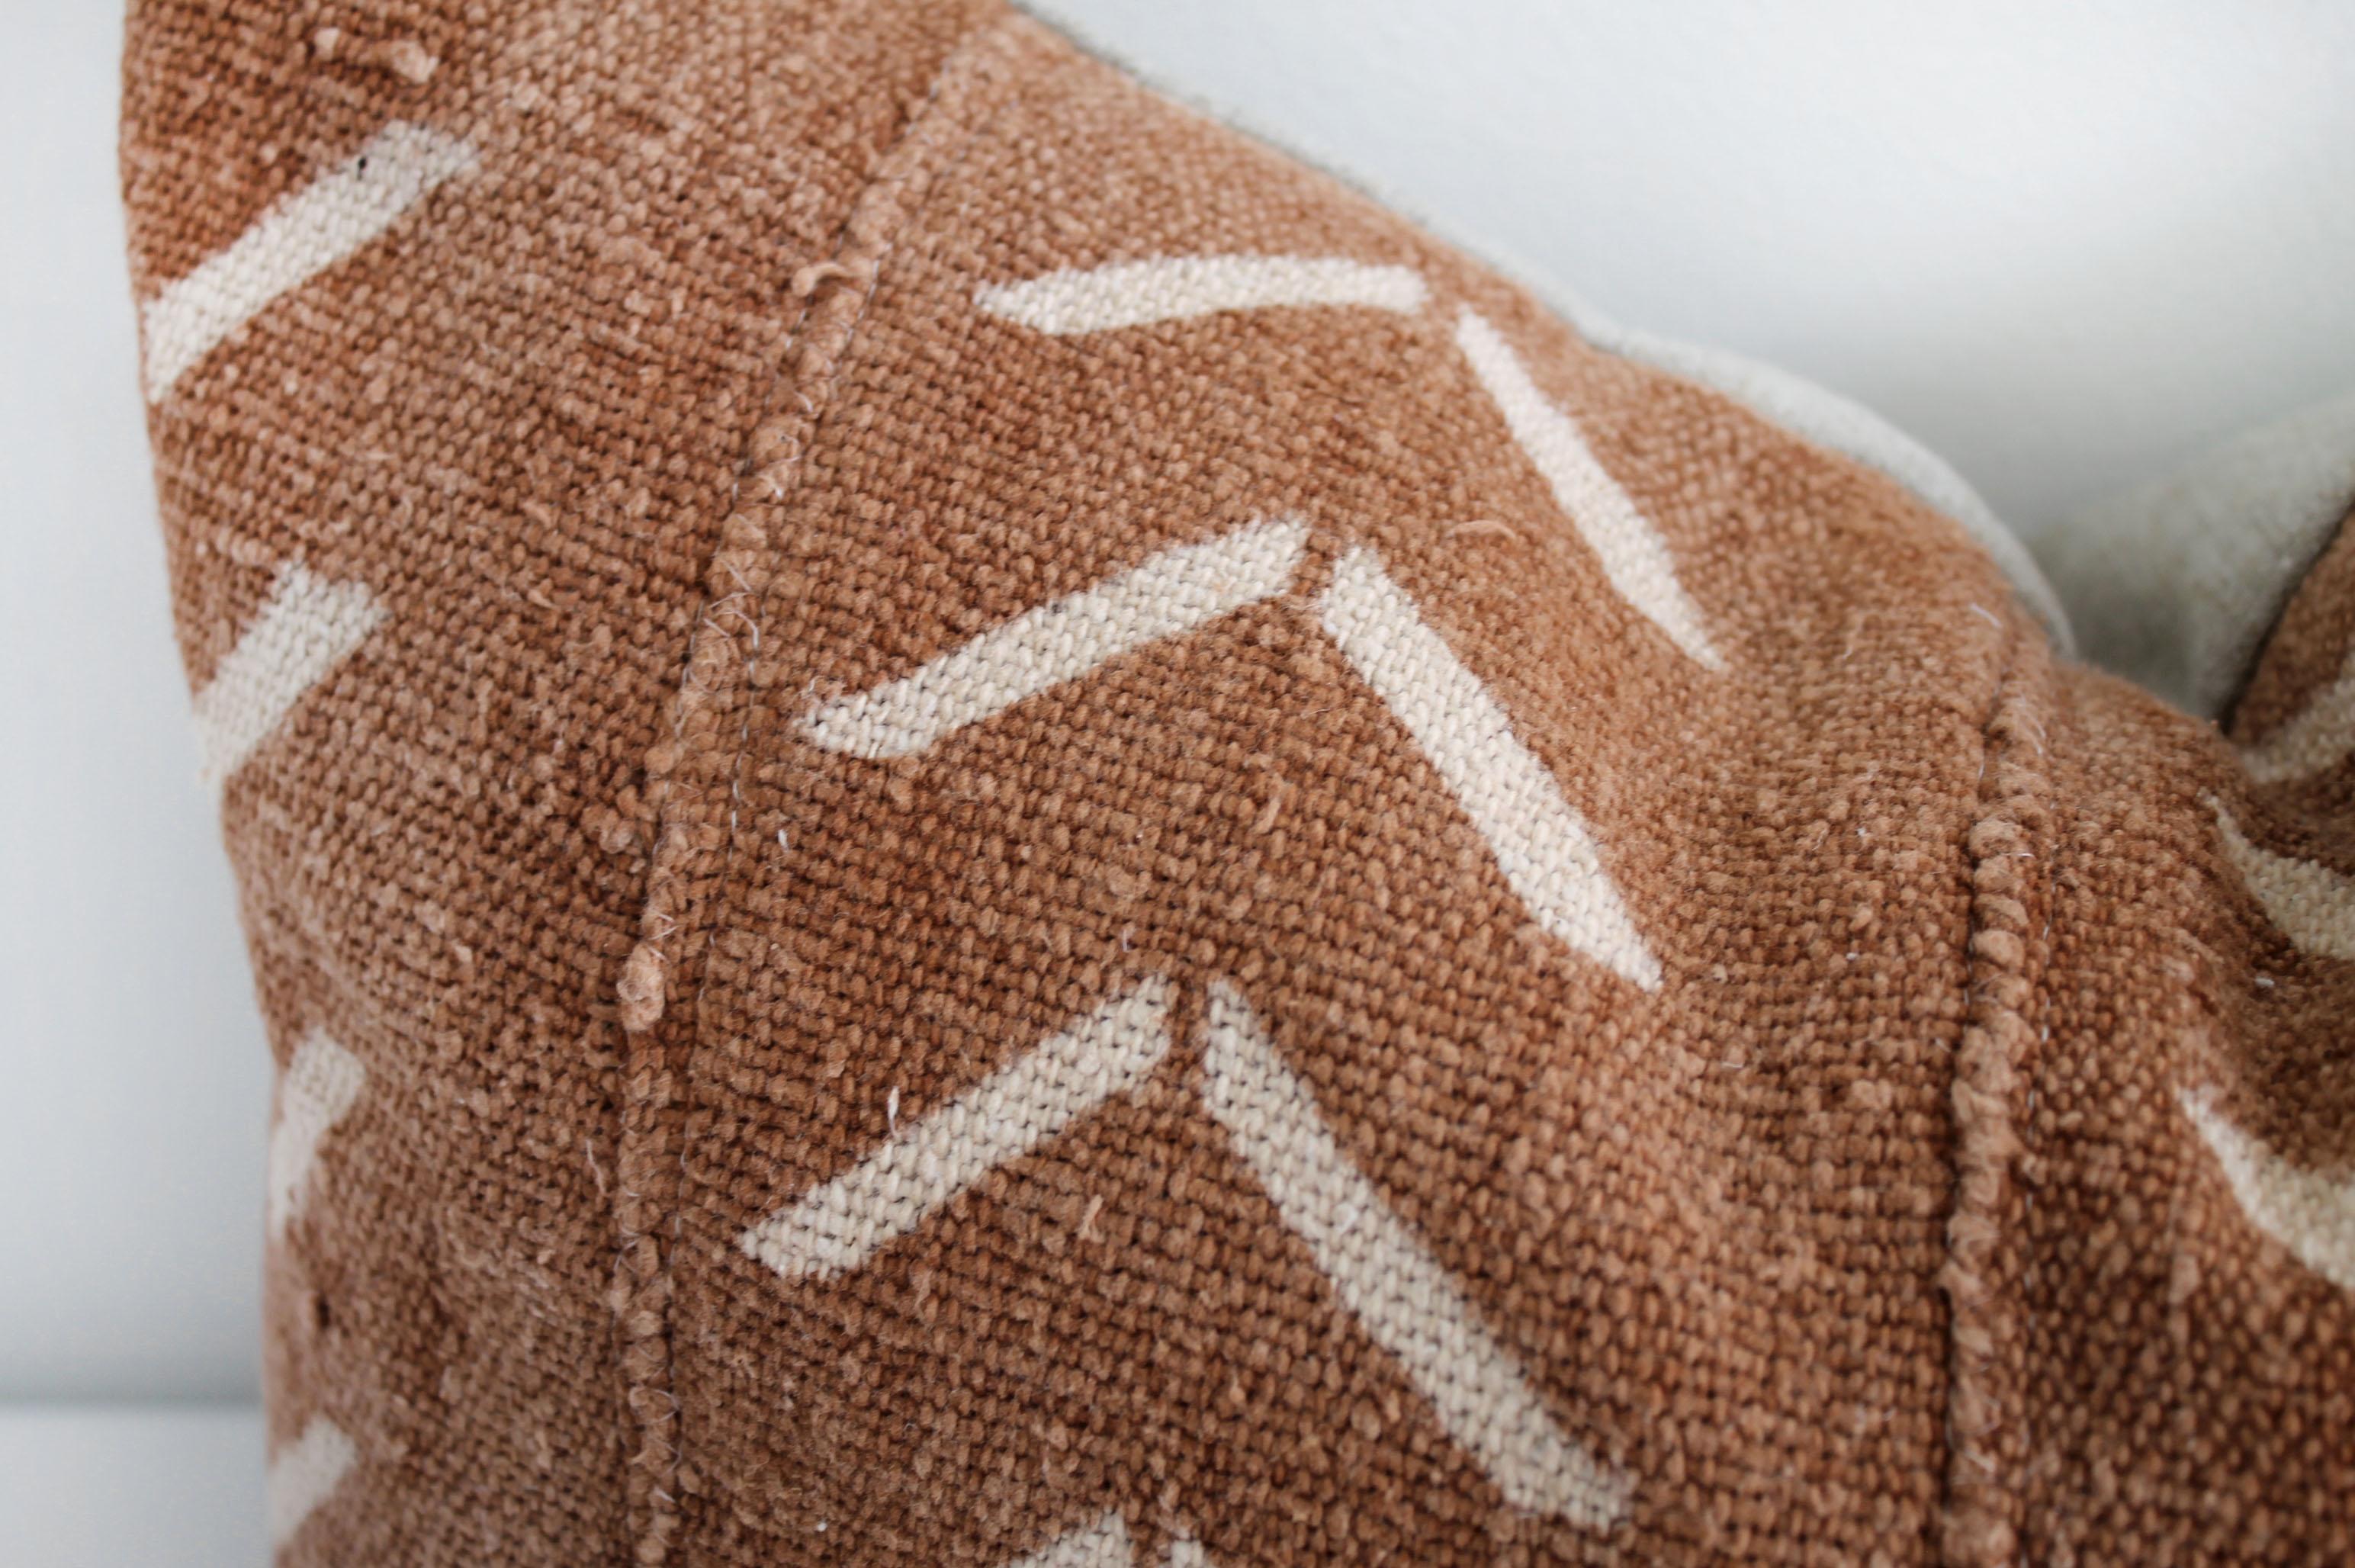 Vintage African Mudcloth pillow from Mali, Africa. A deep burnt orange rust color, with off-white arrow pattern, and features original fringe details from the original material. Sewn with a zipper closure, and natural linen backing. The inside has